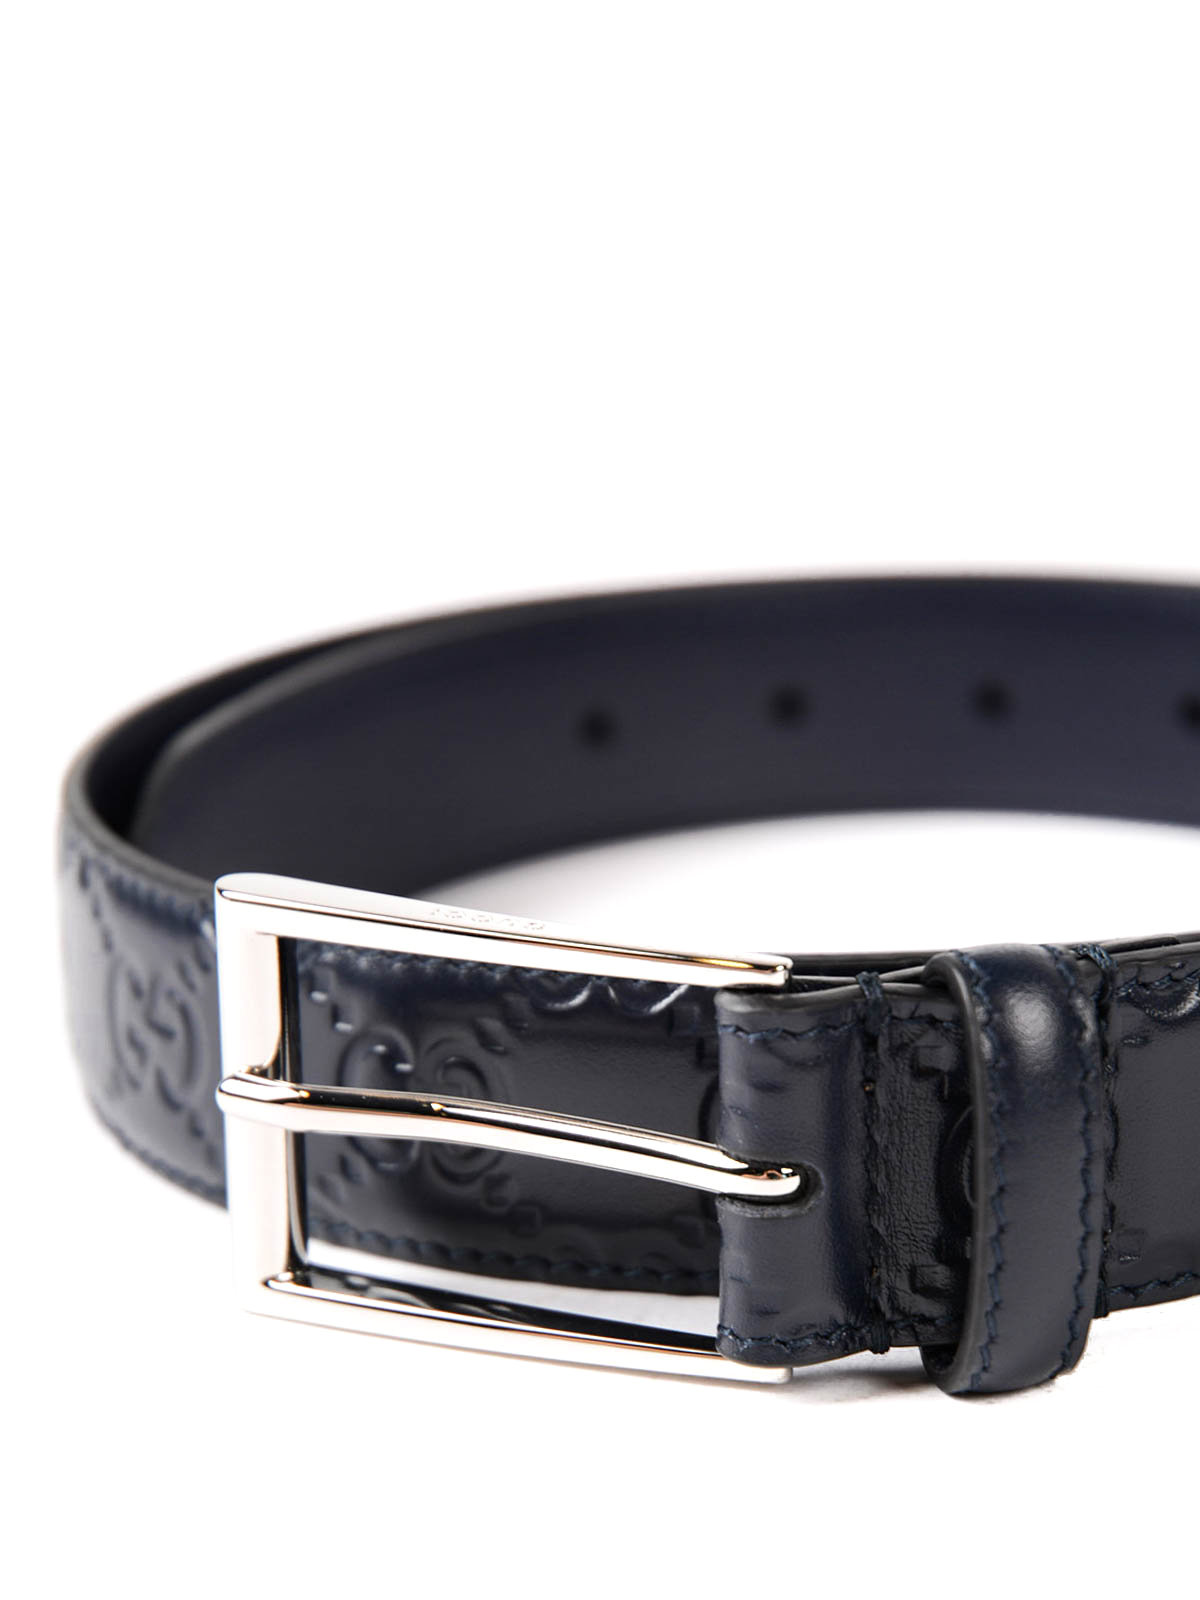 Guccissima leather belt by Gucci - belts | Shop online at 0